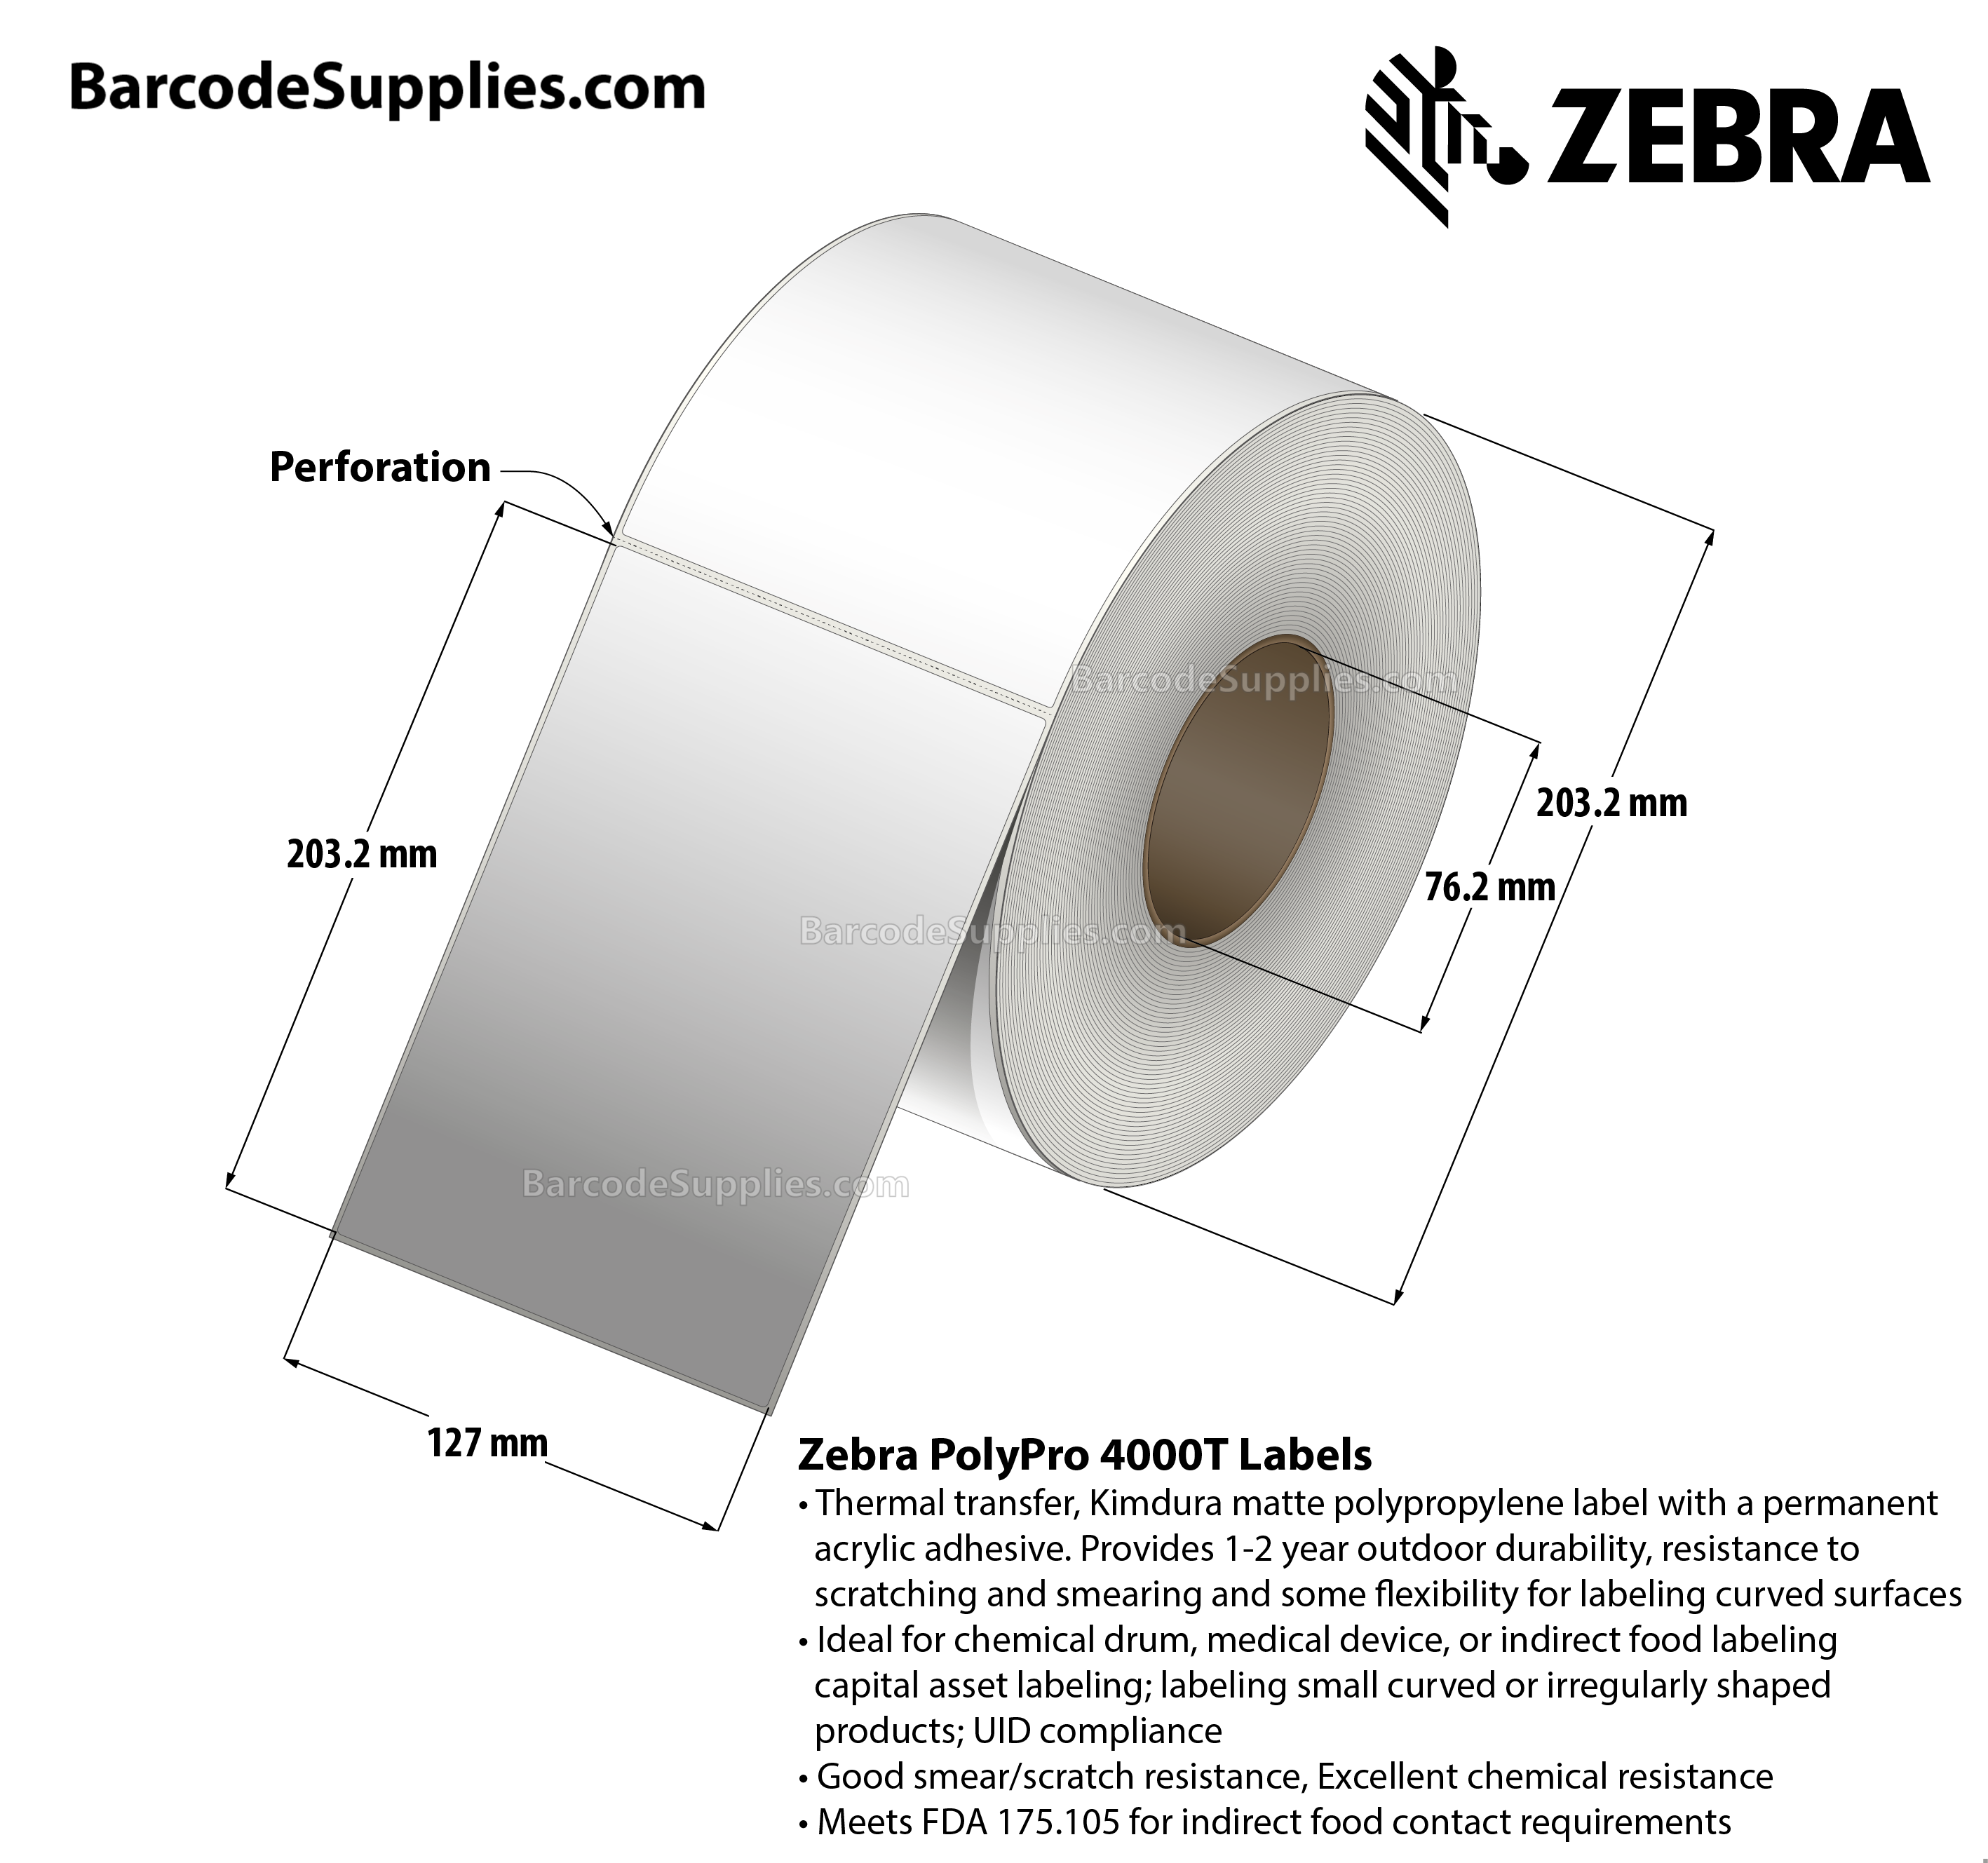 5 x 8 Thermal Transfer White PolyPro 4000T Labels With Permanent Adhesive - Perforated - 560 Labels Per Roll - Carton Of 4 Rolls - 2240 Labels Total - MPN: 10014715